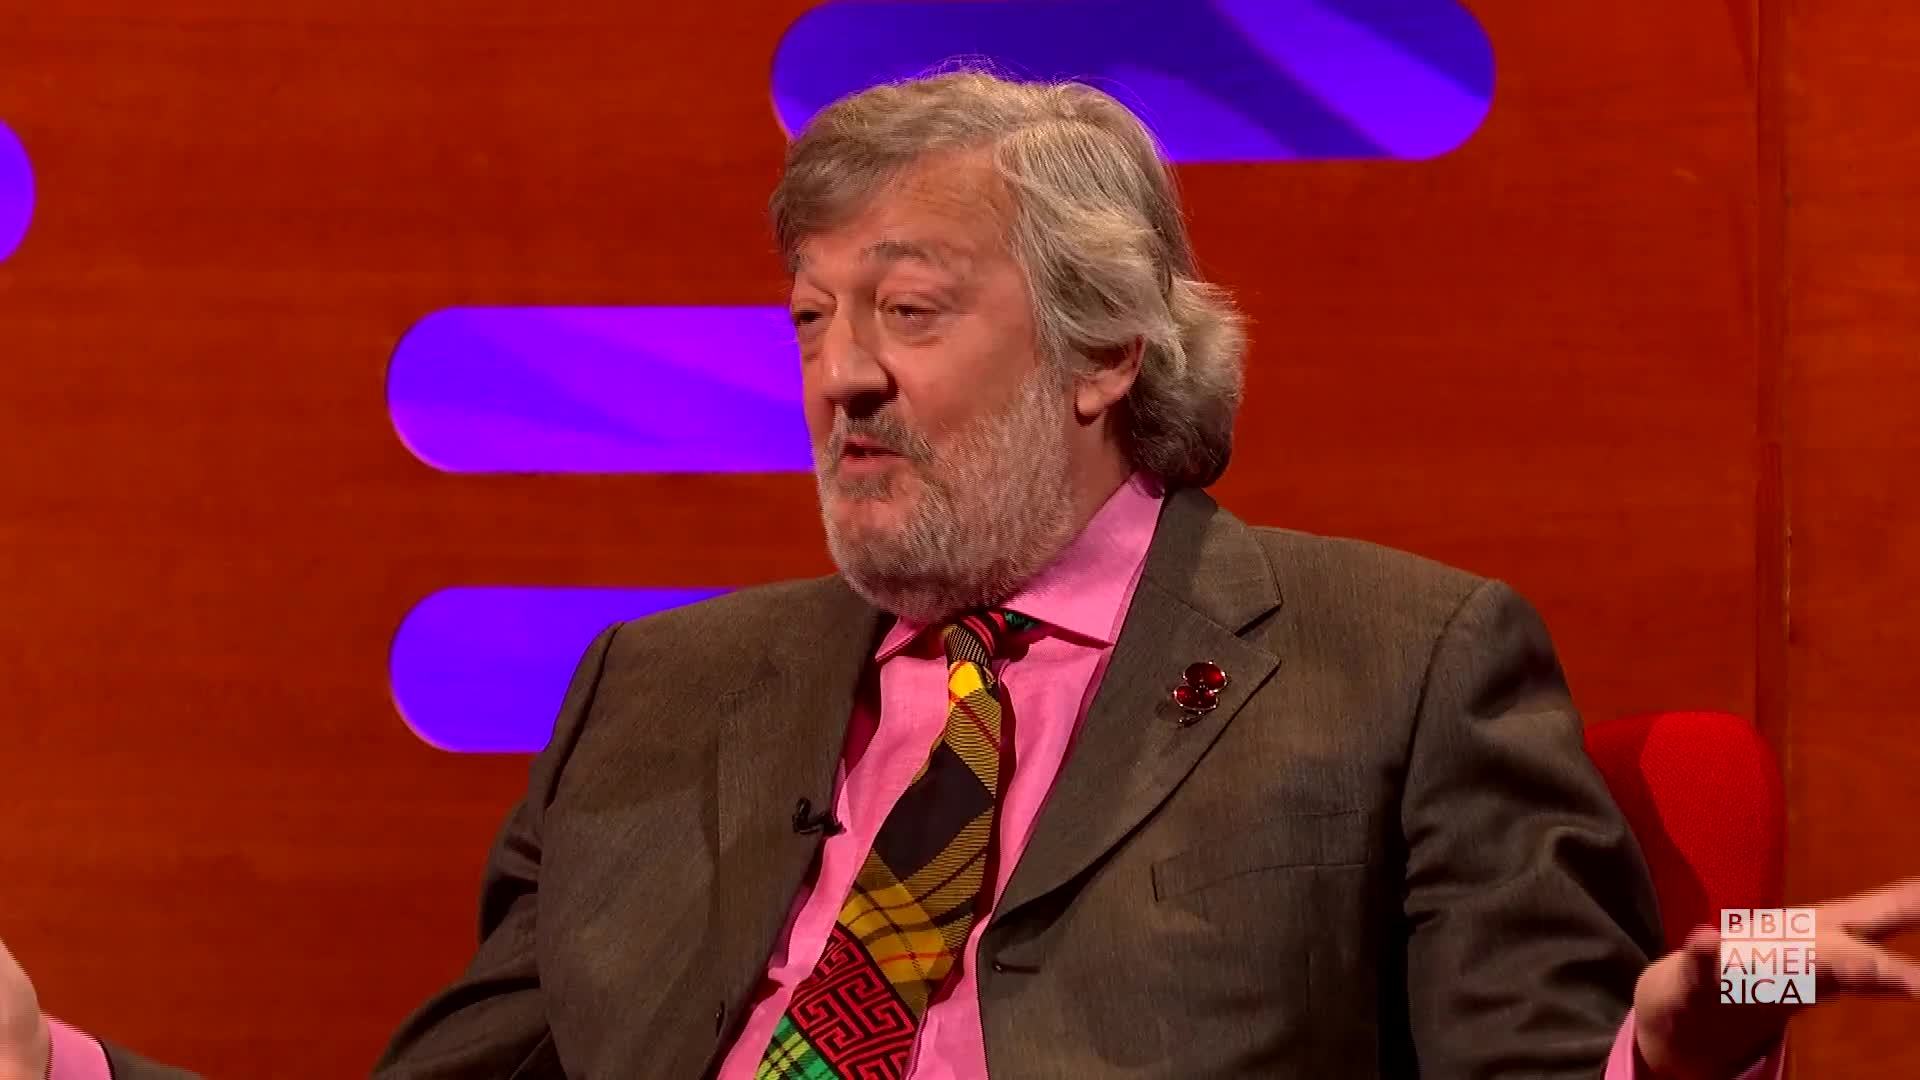 Watch Stephen Fry’s Awkward Comment to J.K. Rowling | The Graham Norton Show Video Extras